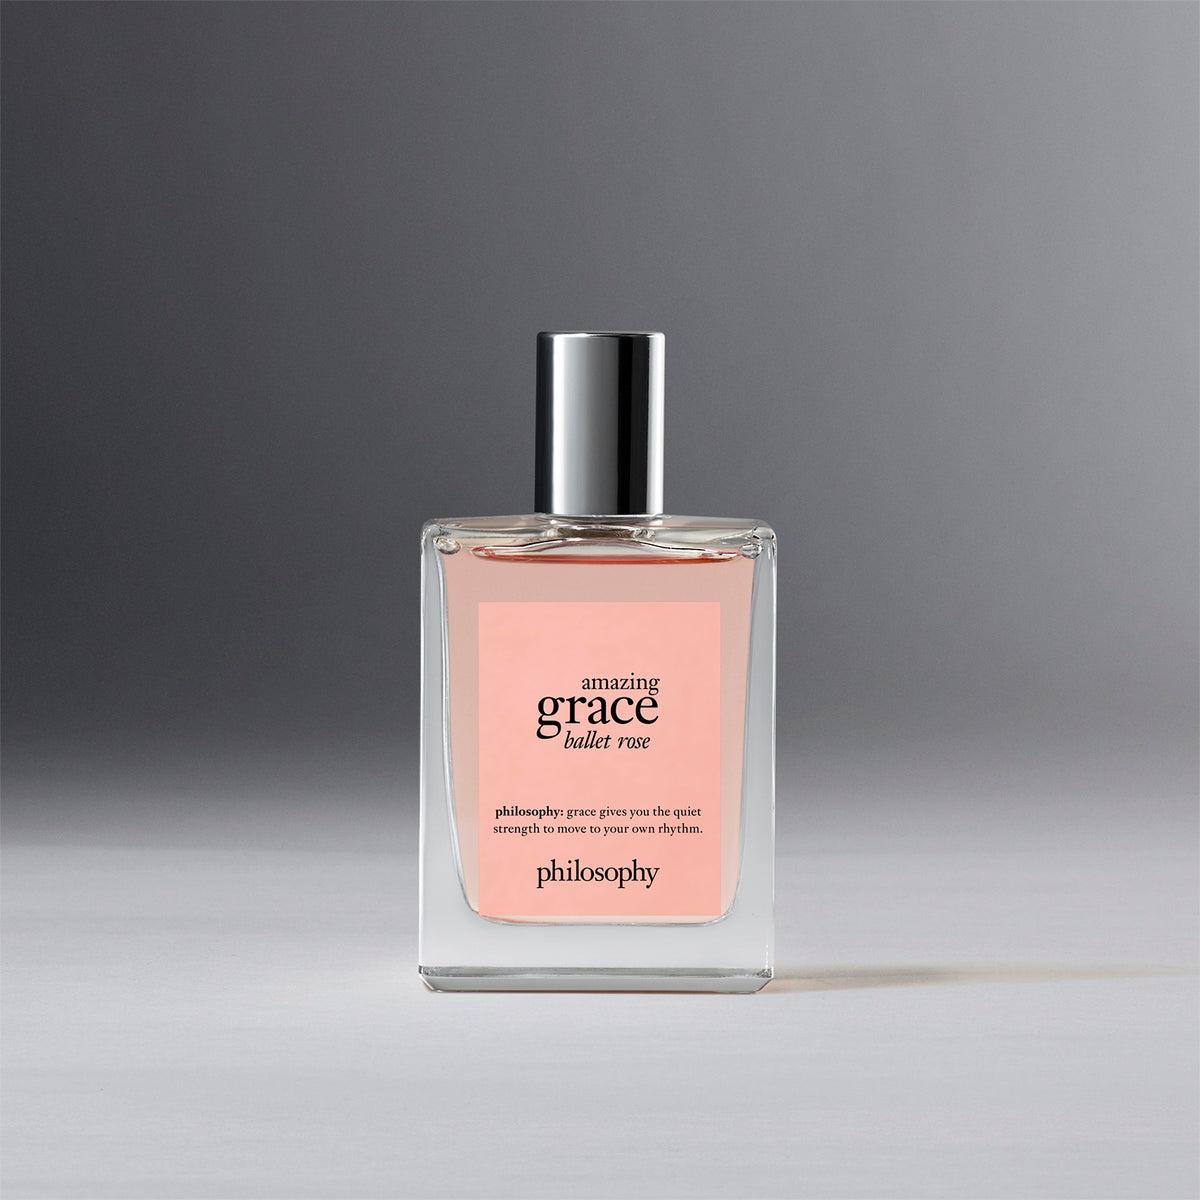 NEW, Amazing Grace by Philosophy EDT Perfume for Women, 2 oz